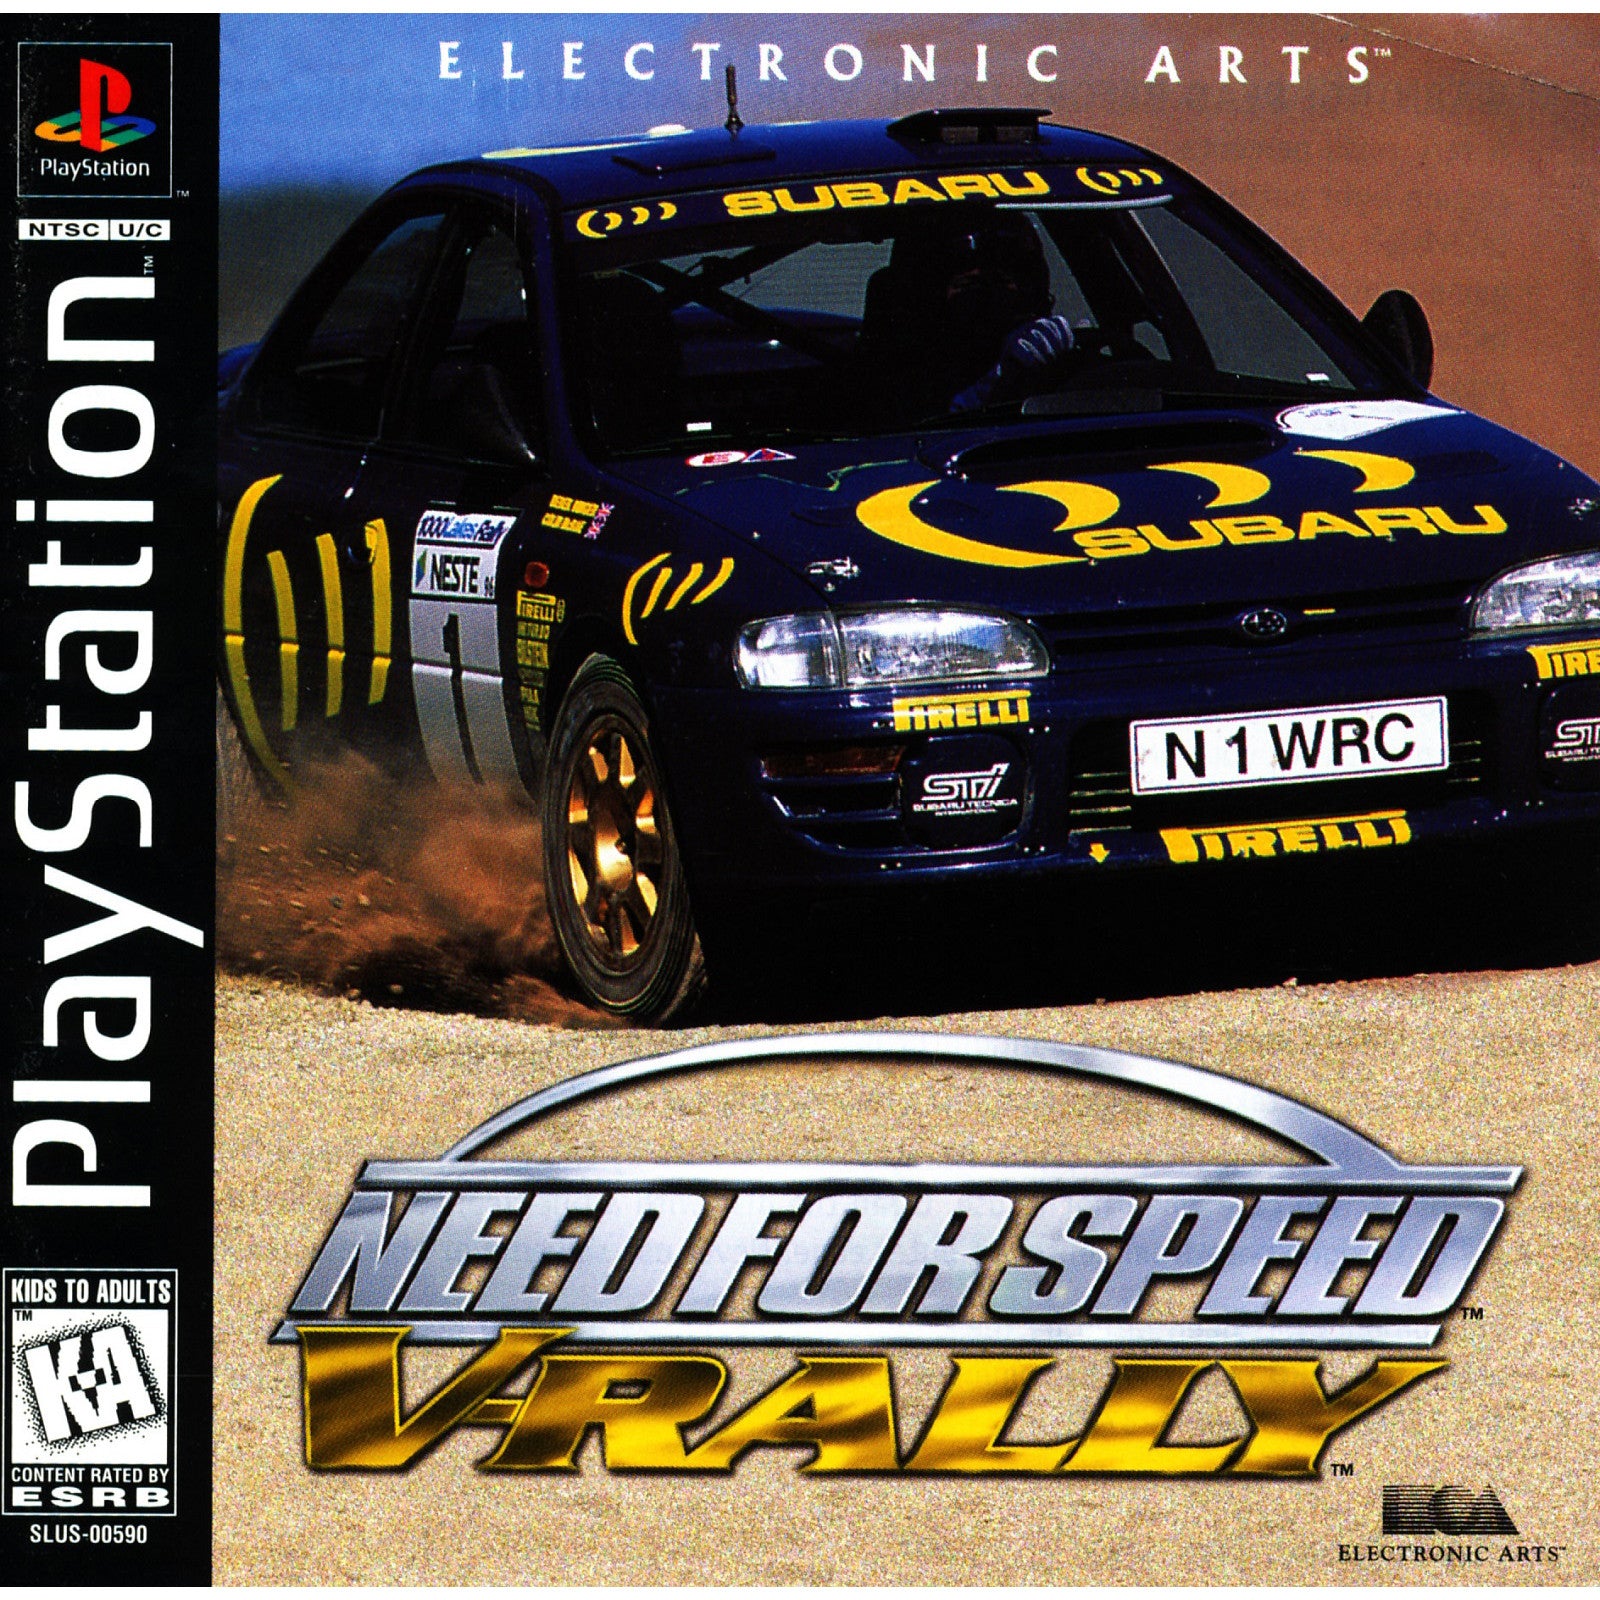 Need for Speed: V-Rally for PlayStation 1